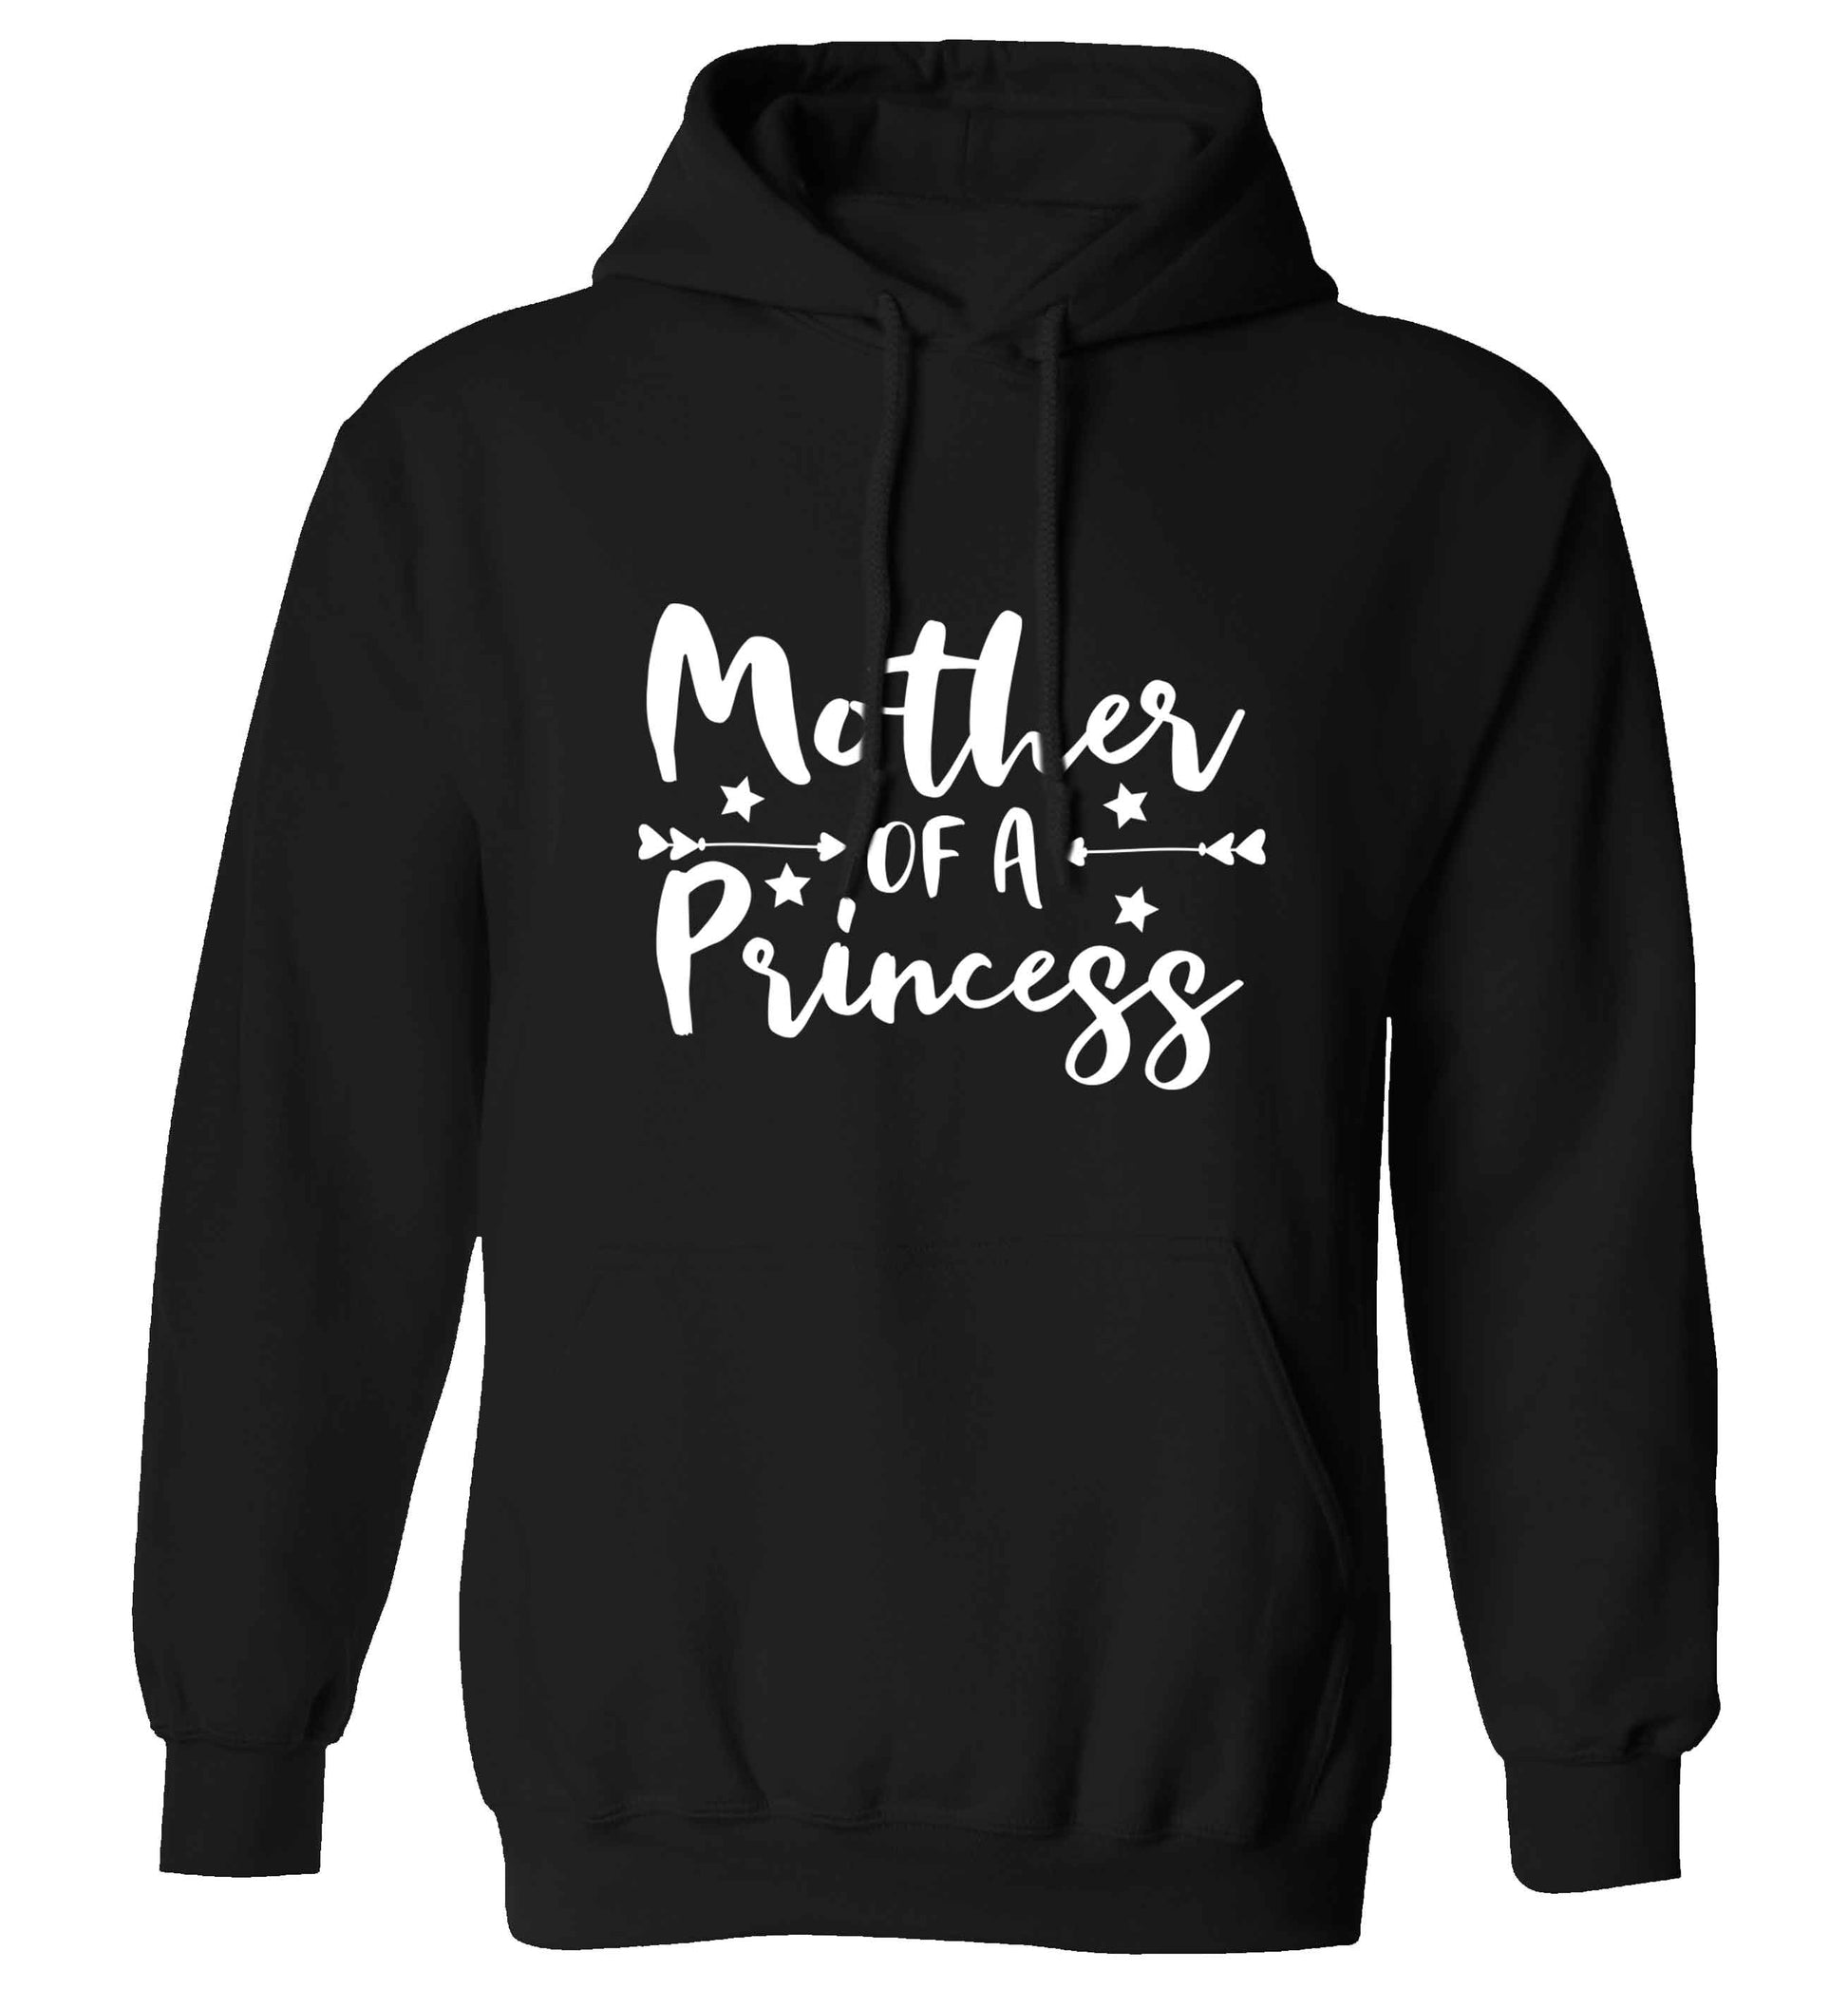 Mother of a princess adults unisex black hoodie 2XL